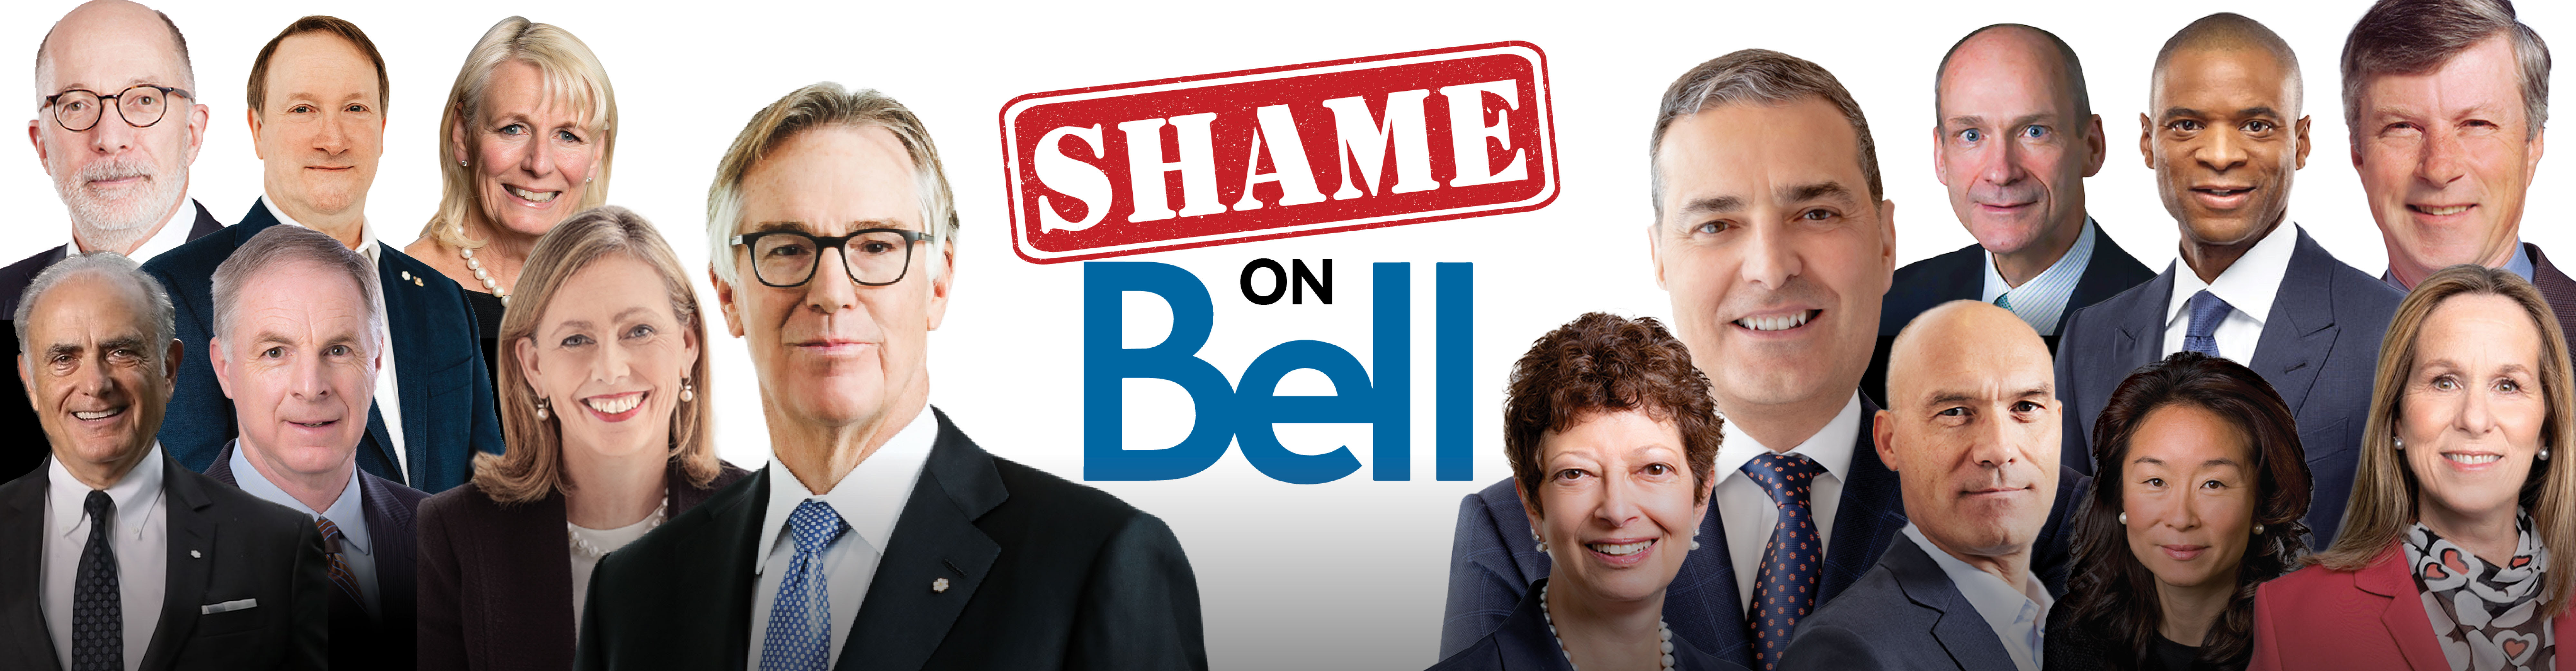 Shame on Bell graphic